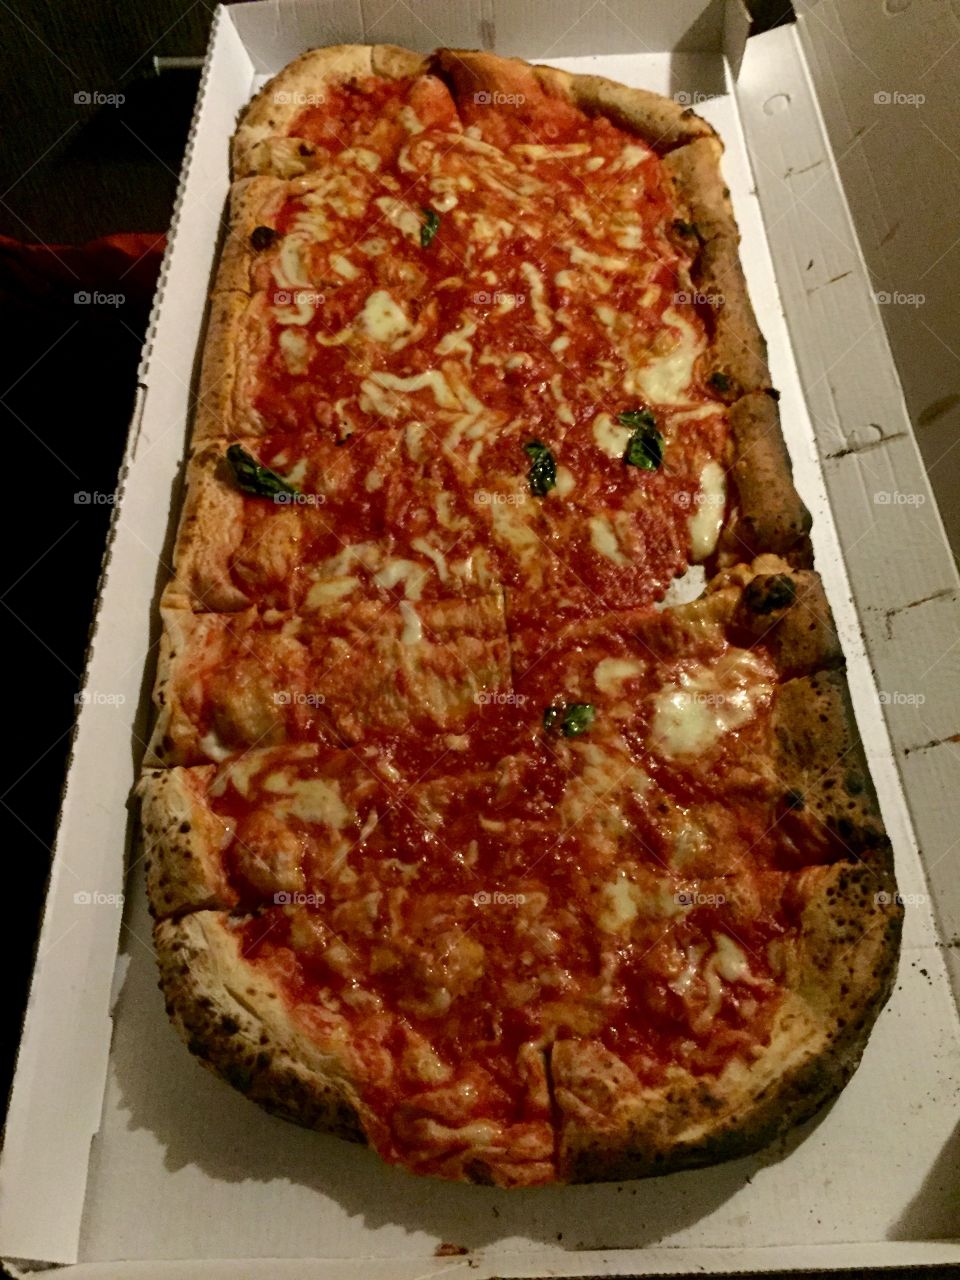 Its called 1 meter pizza, and yeah, of course its from Italy